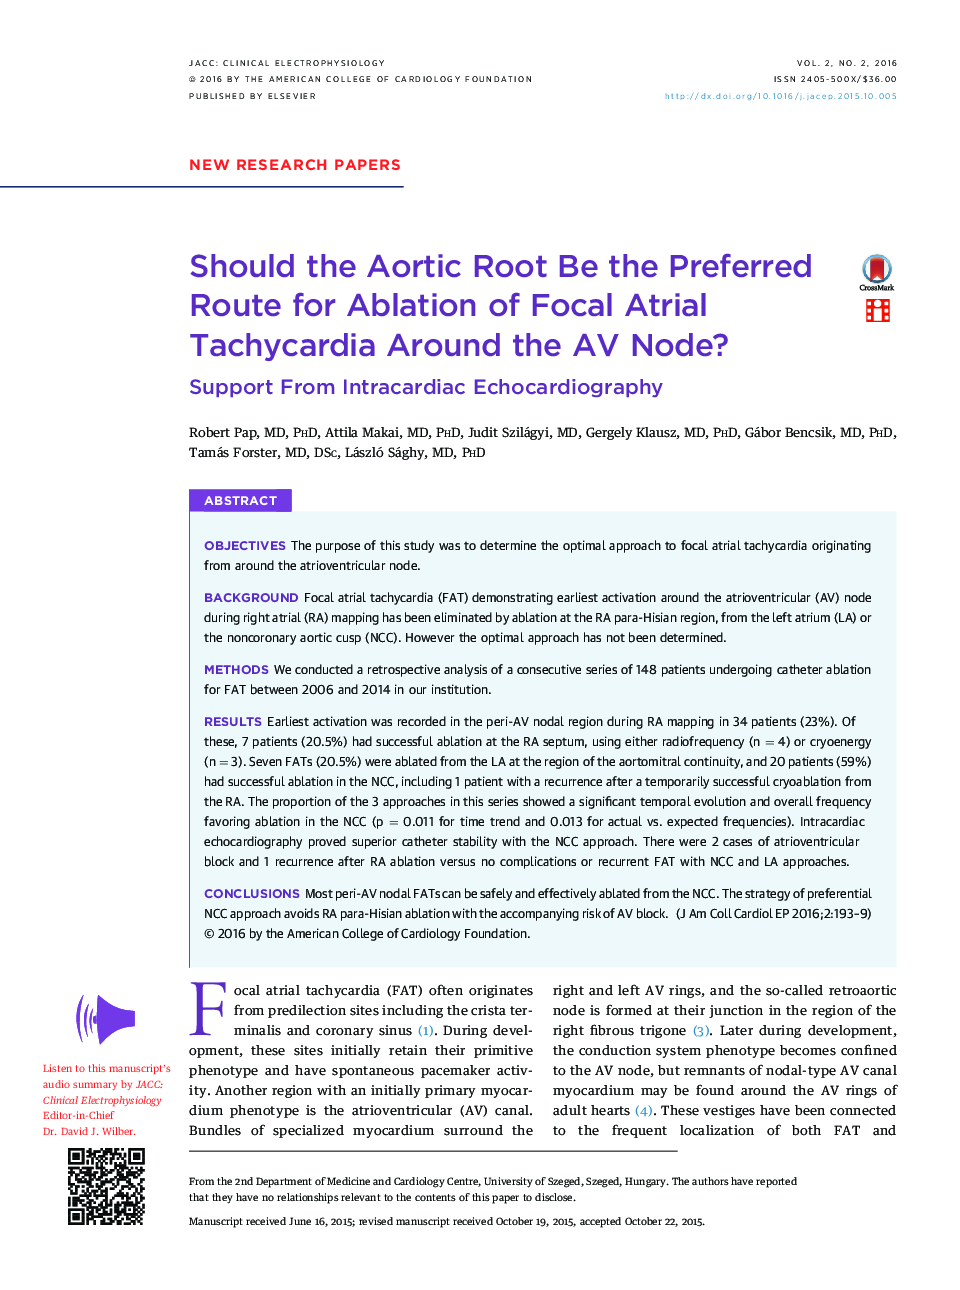 Should the Aortic Root Be the Preferred Route for Ablation of Focal Atrial Tachycardia Around the AV Node? : Support From Intracardiac Echocardiography